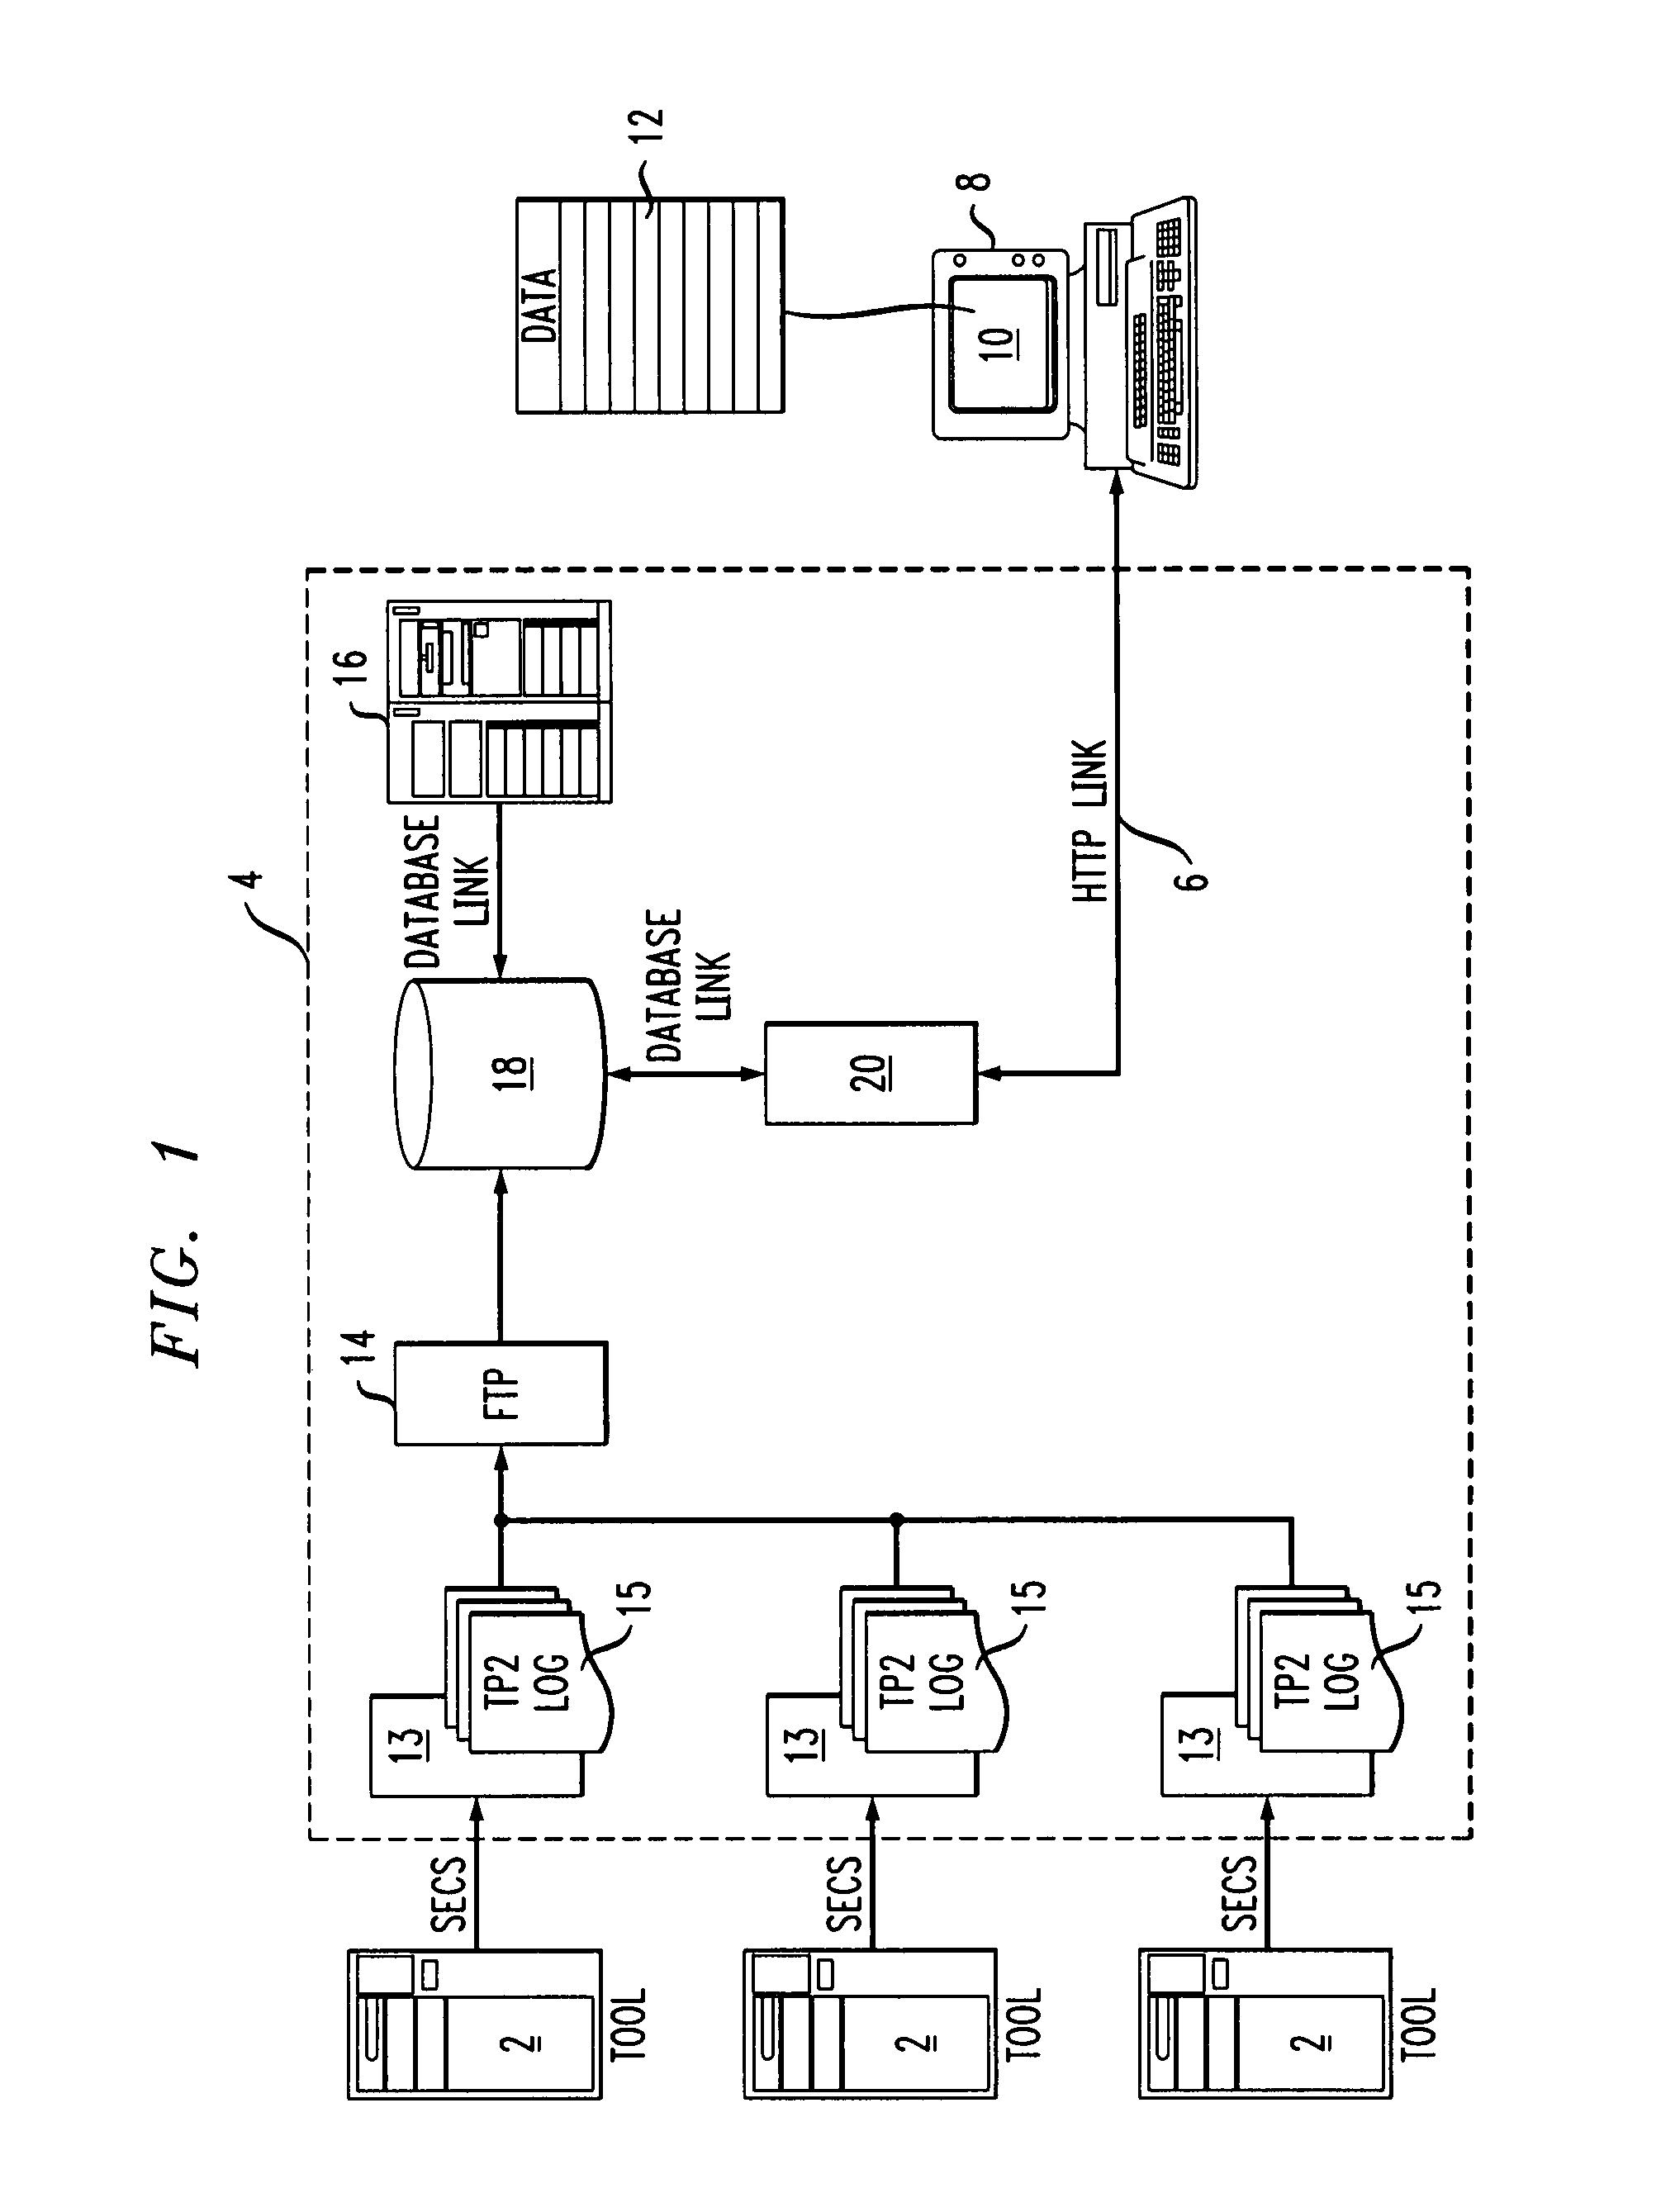 Method and software for conducting efficient lithography WPH / lost time analysis in semiconductor manufacturing